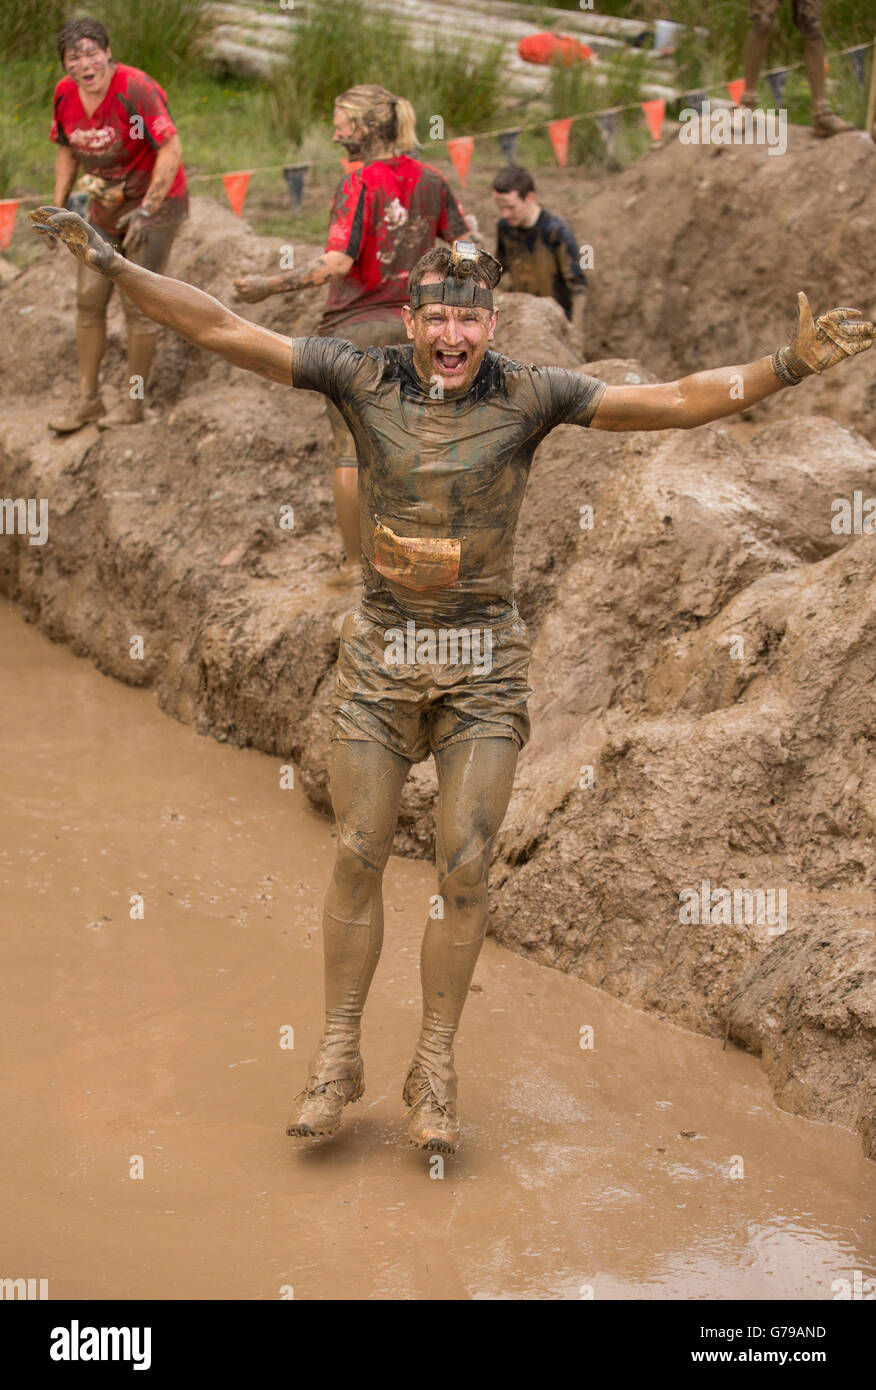 Man taking mud bath on the the Mud Mile obstacle at Tough Mudder at Drumlanrig Castle, Dumfries and Galloway, Scotland, UK. 26th June, 2016. Stock Photo